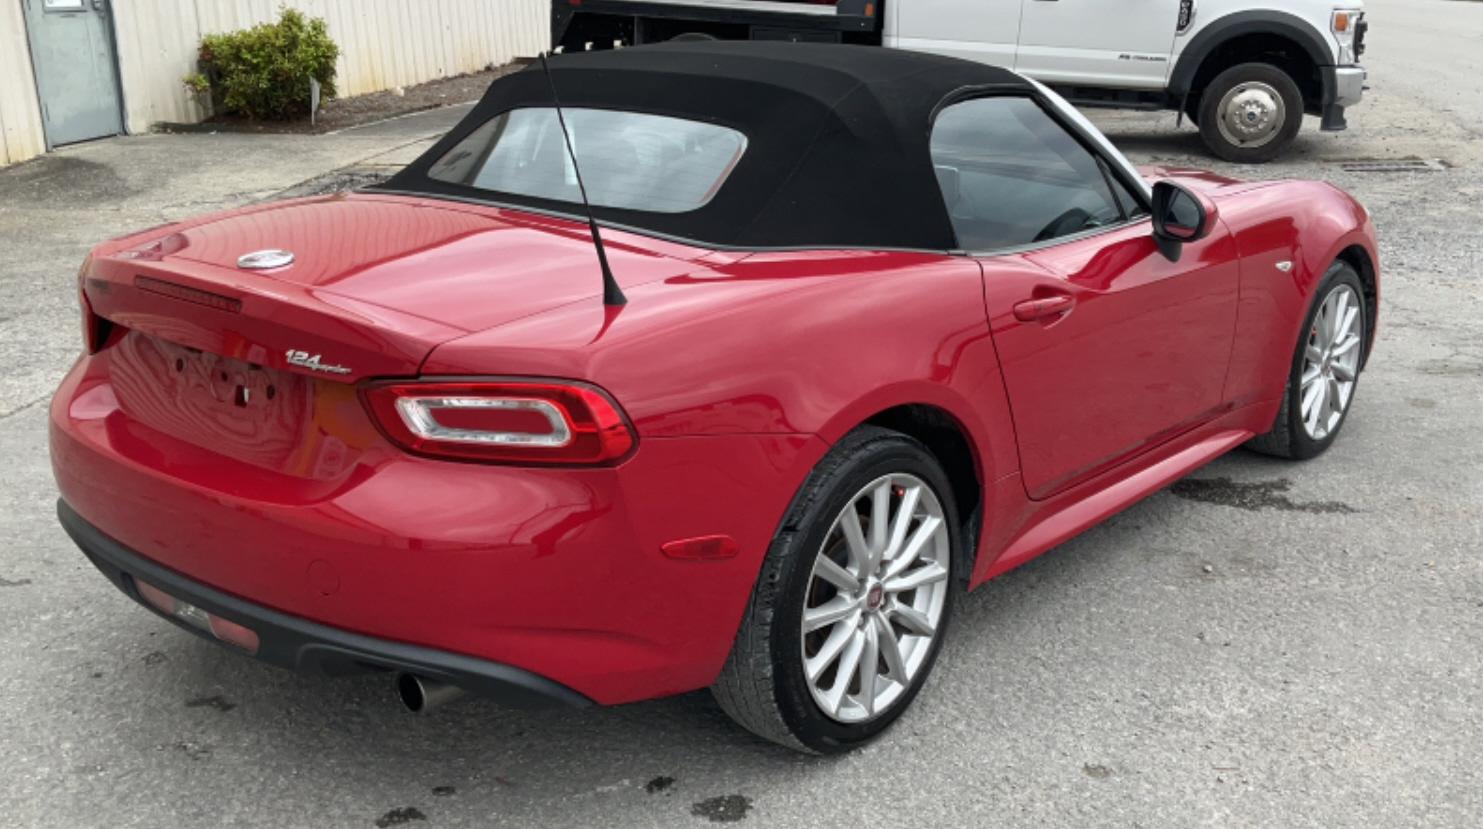 Bankruptcy Vehicle 2018 Fiat Spider 124 Convertibl